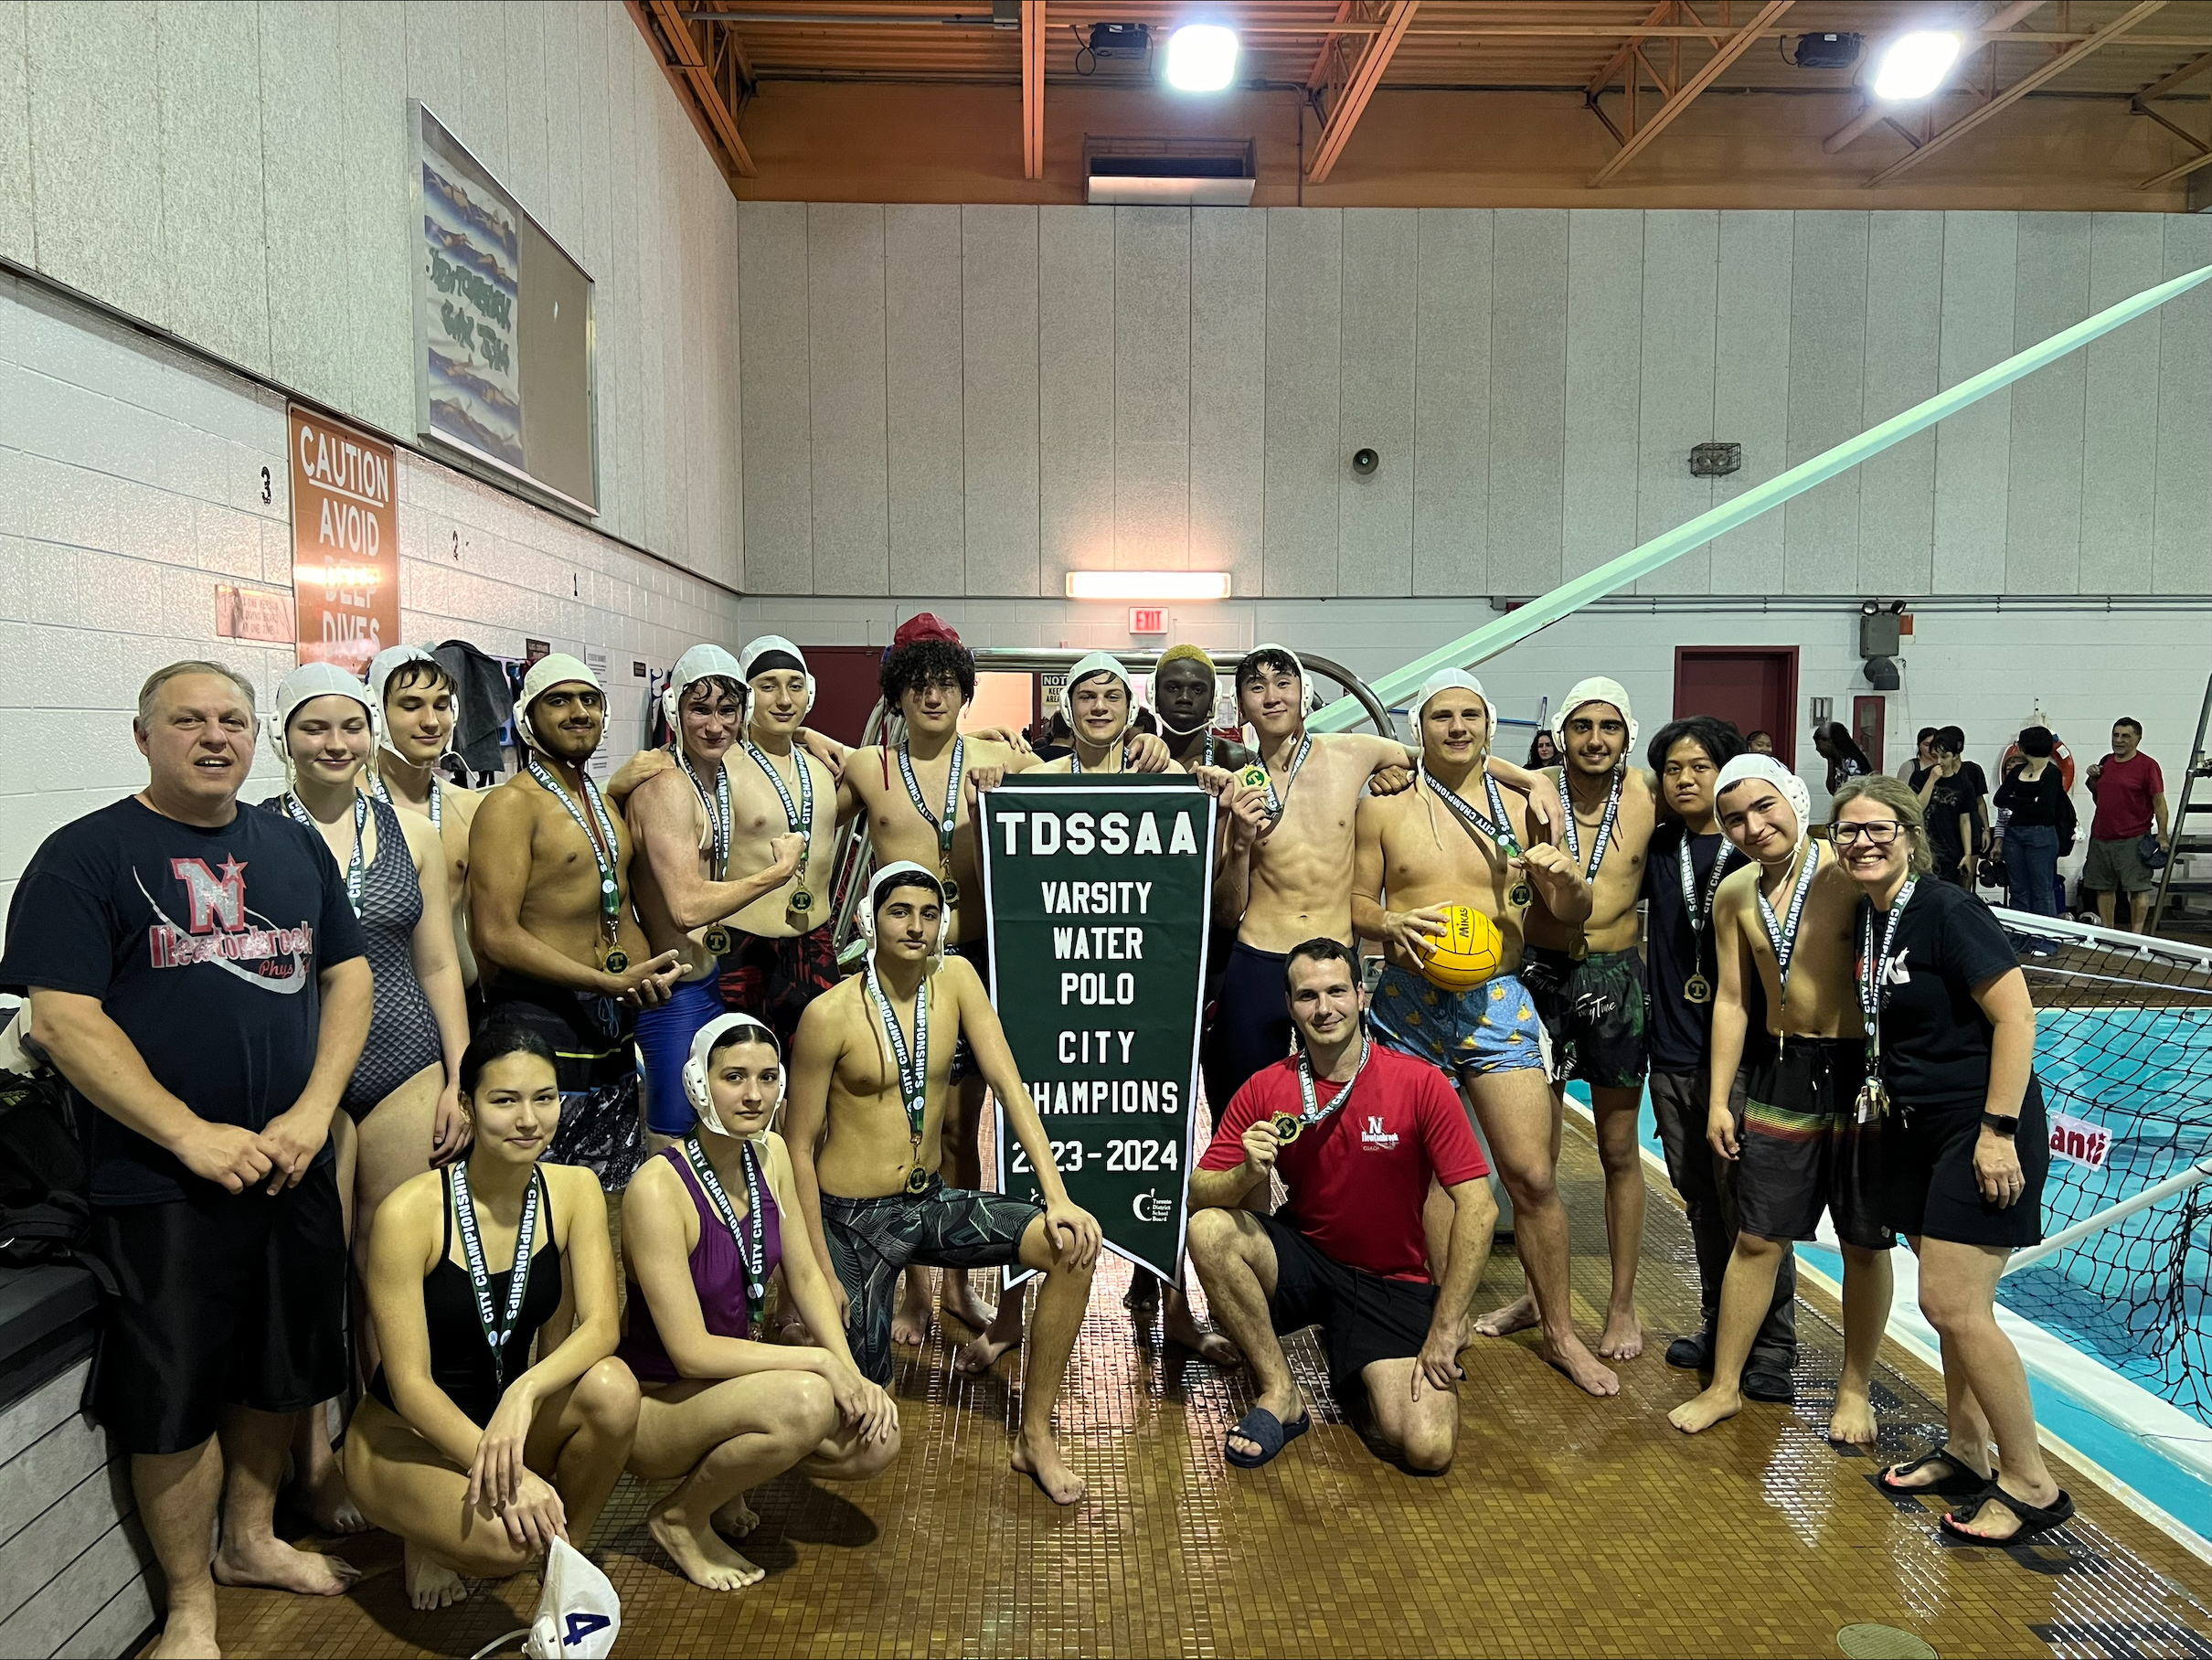 Waterpolo City Champions